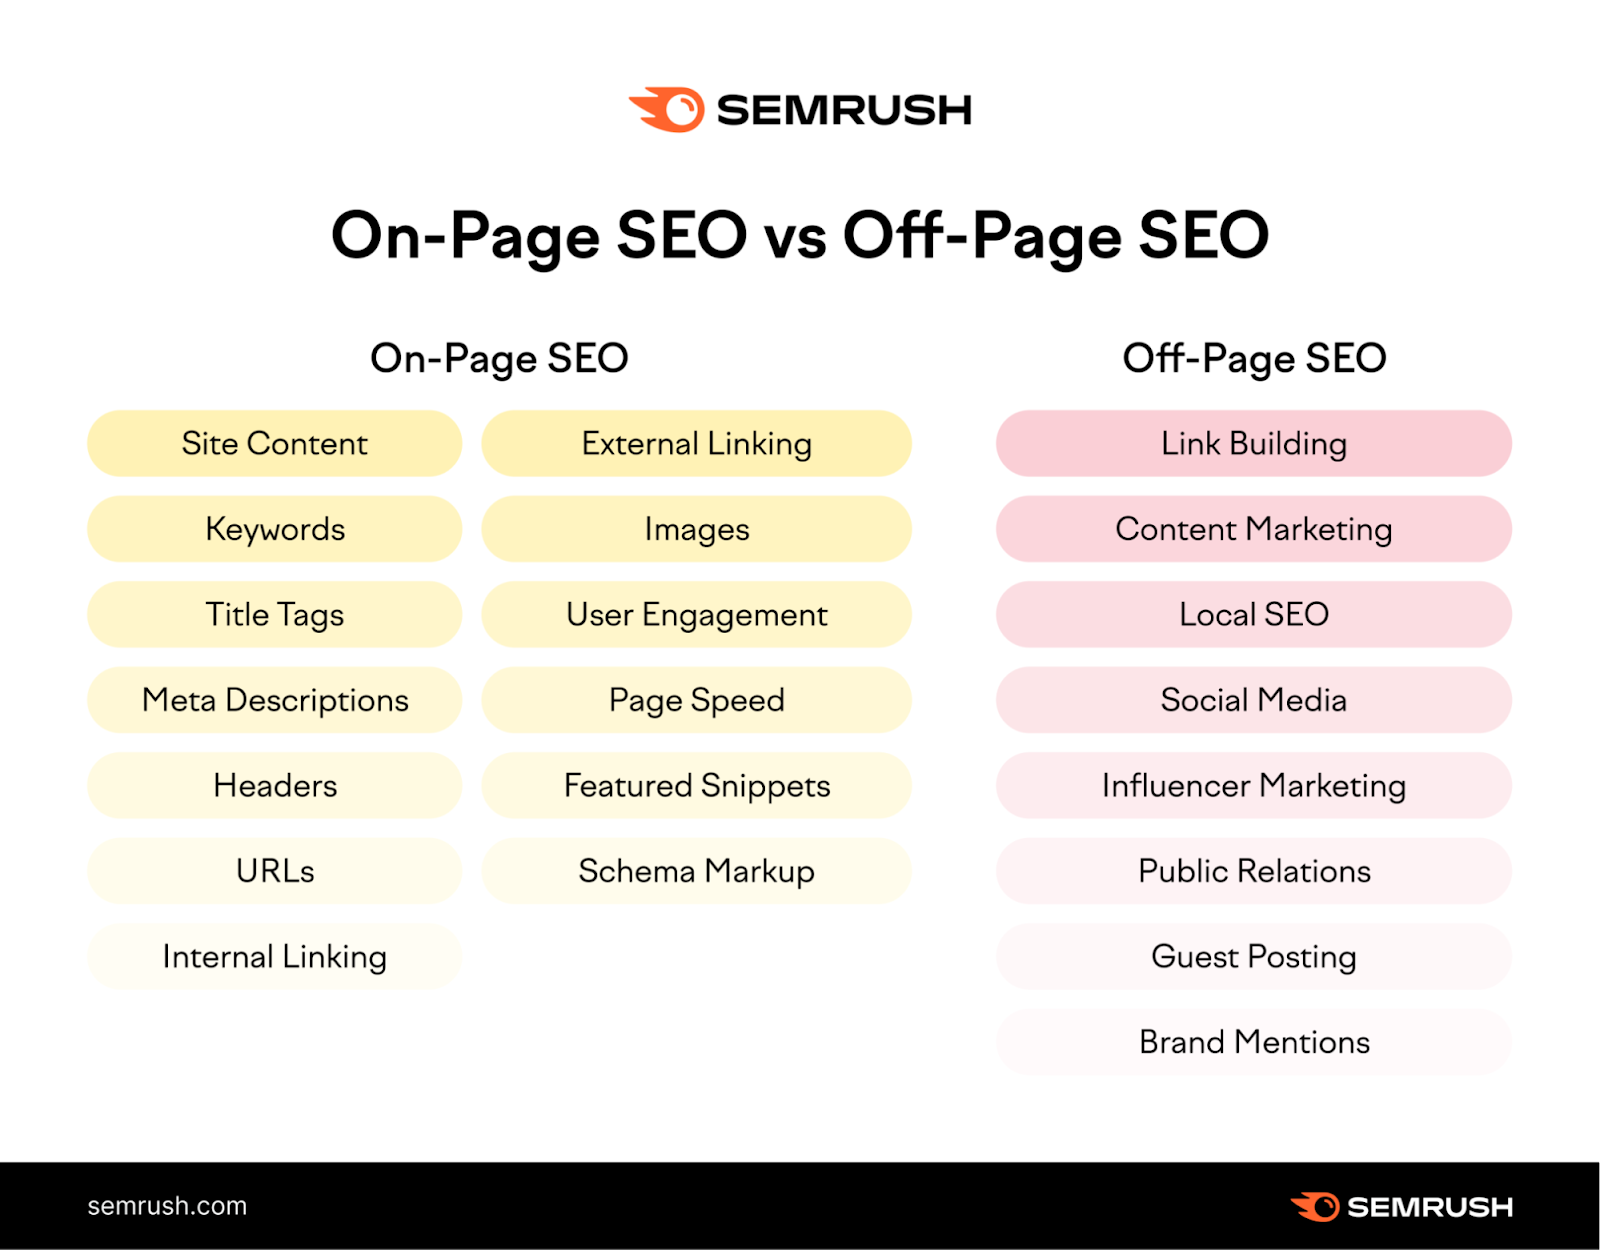 An infographic by Semrush listing the elements of on-page SEO vs off-page SEO